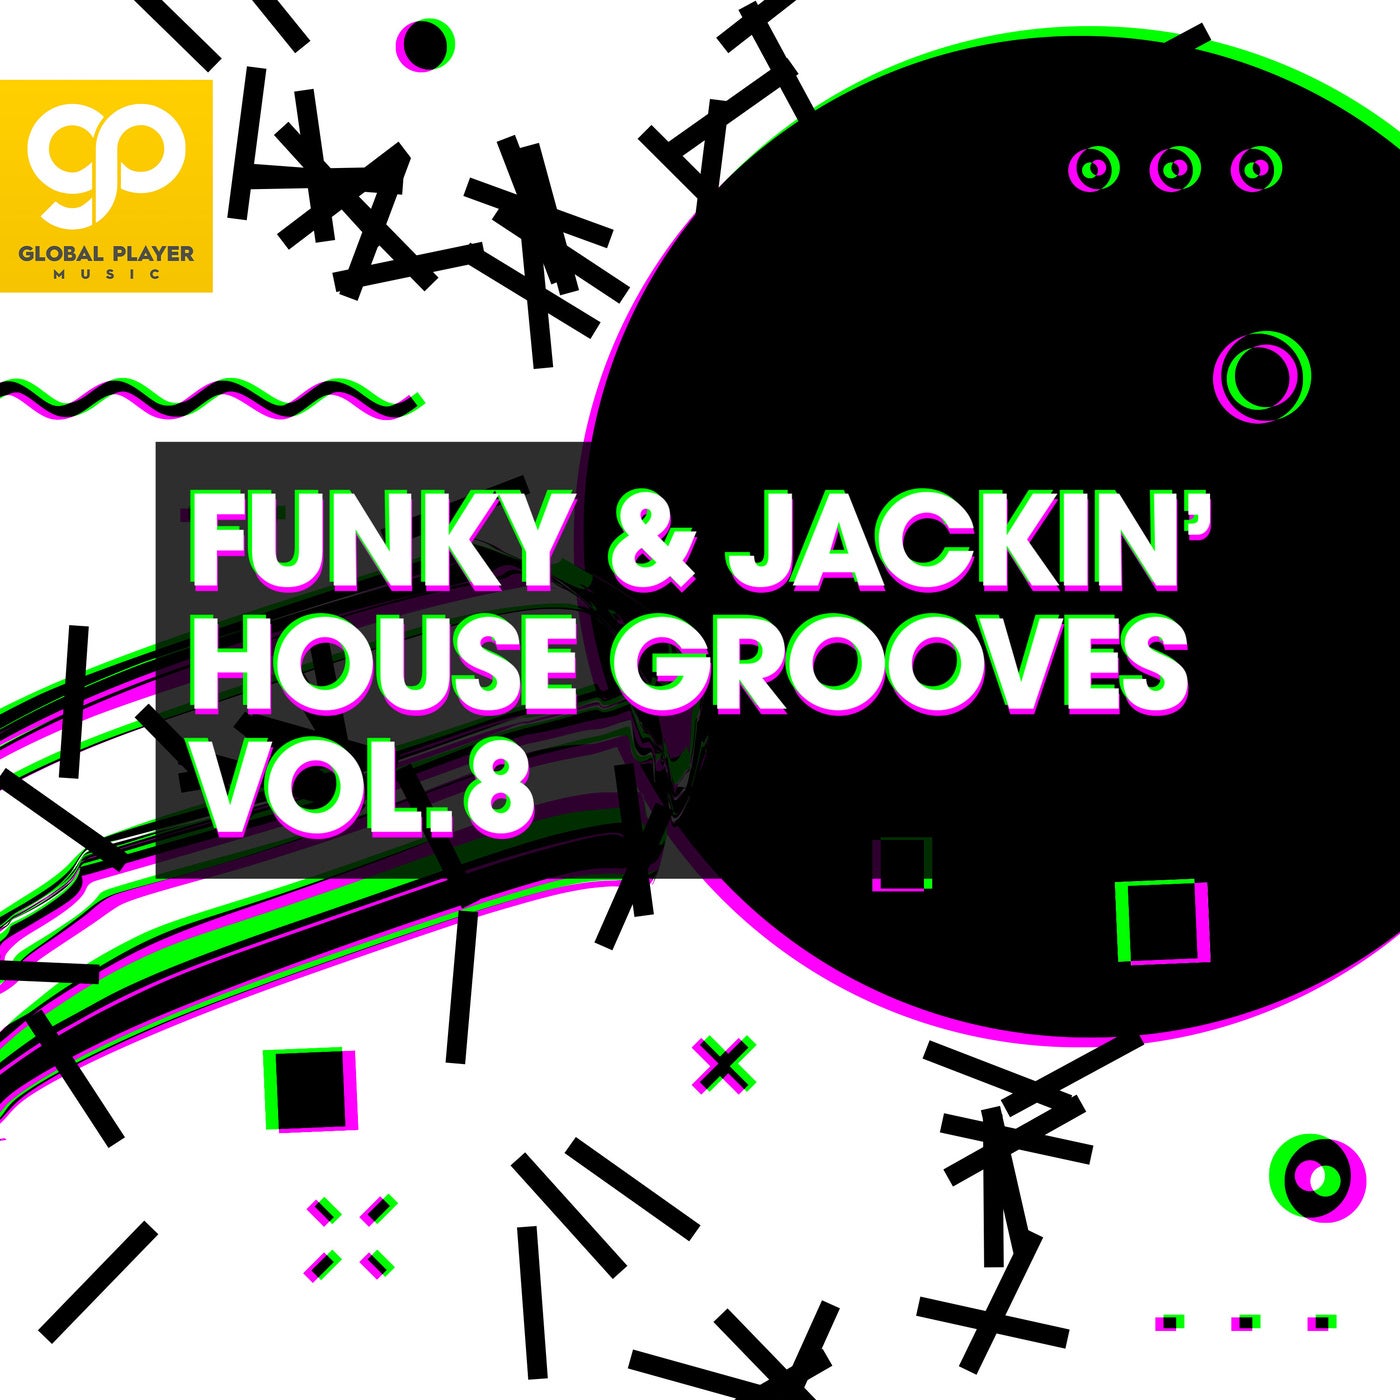 Funky & Jackin' House Grooves, Vol. 8